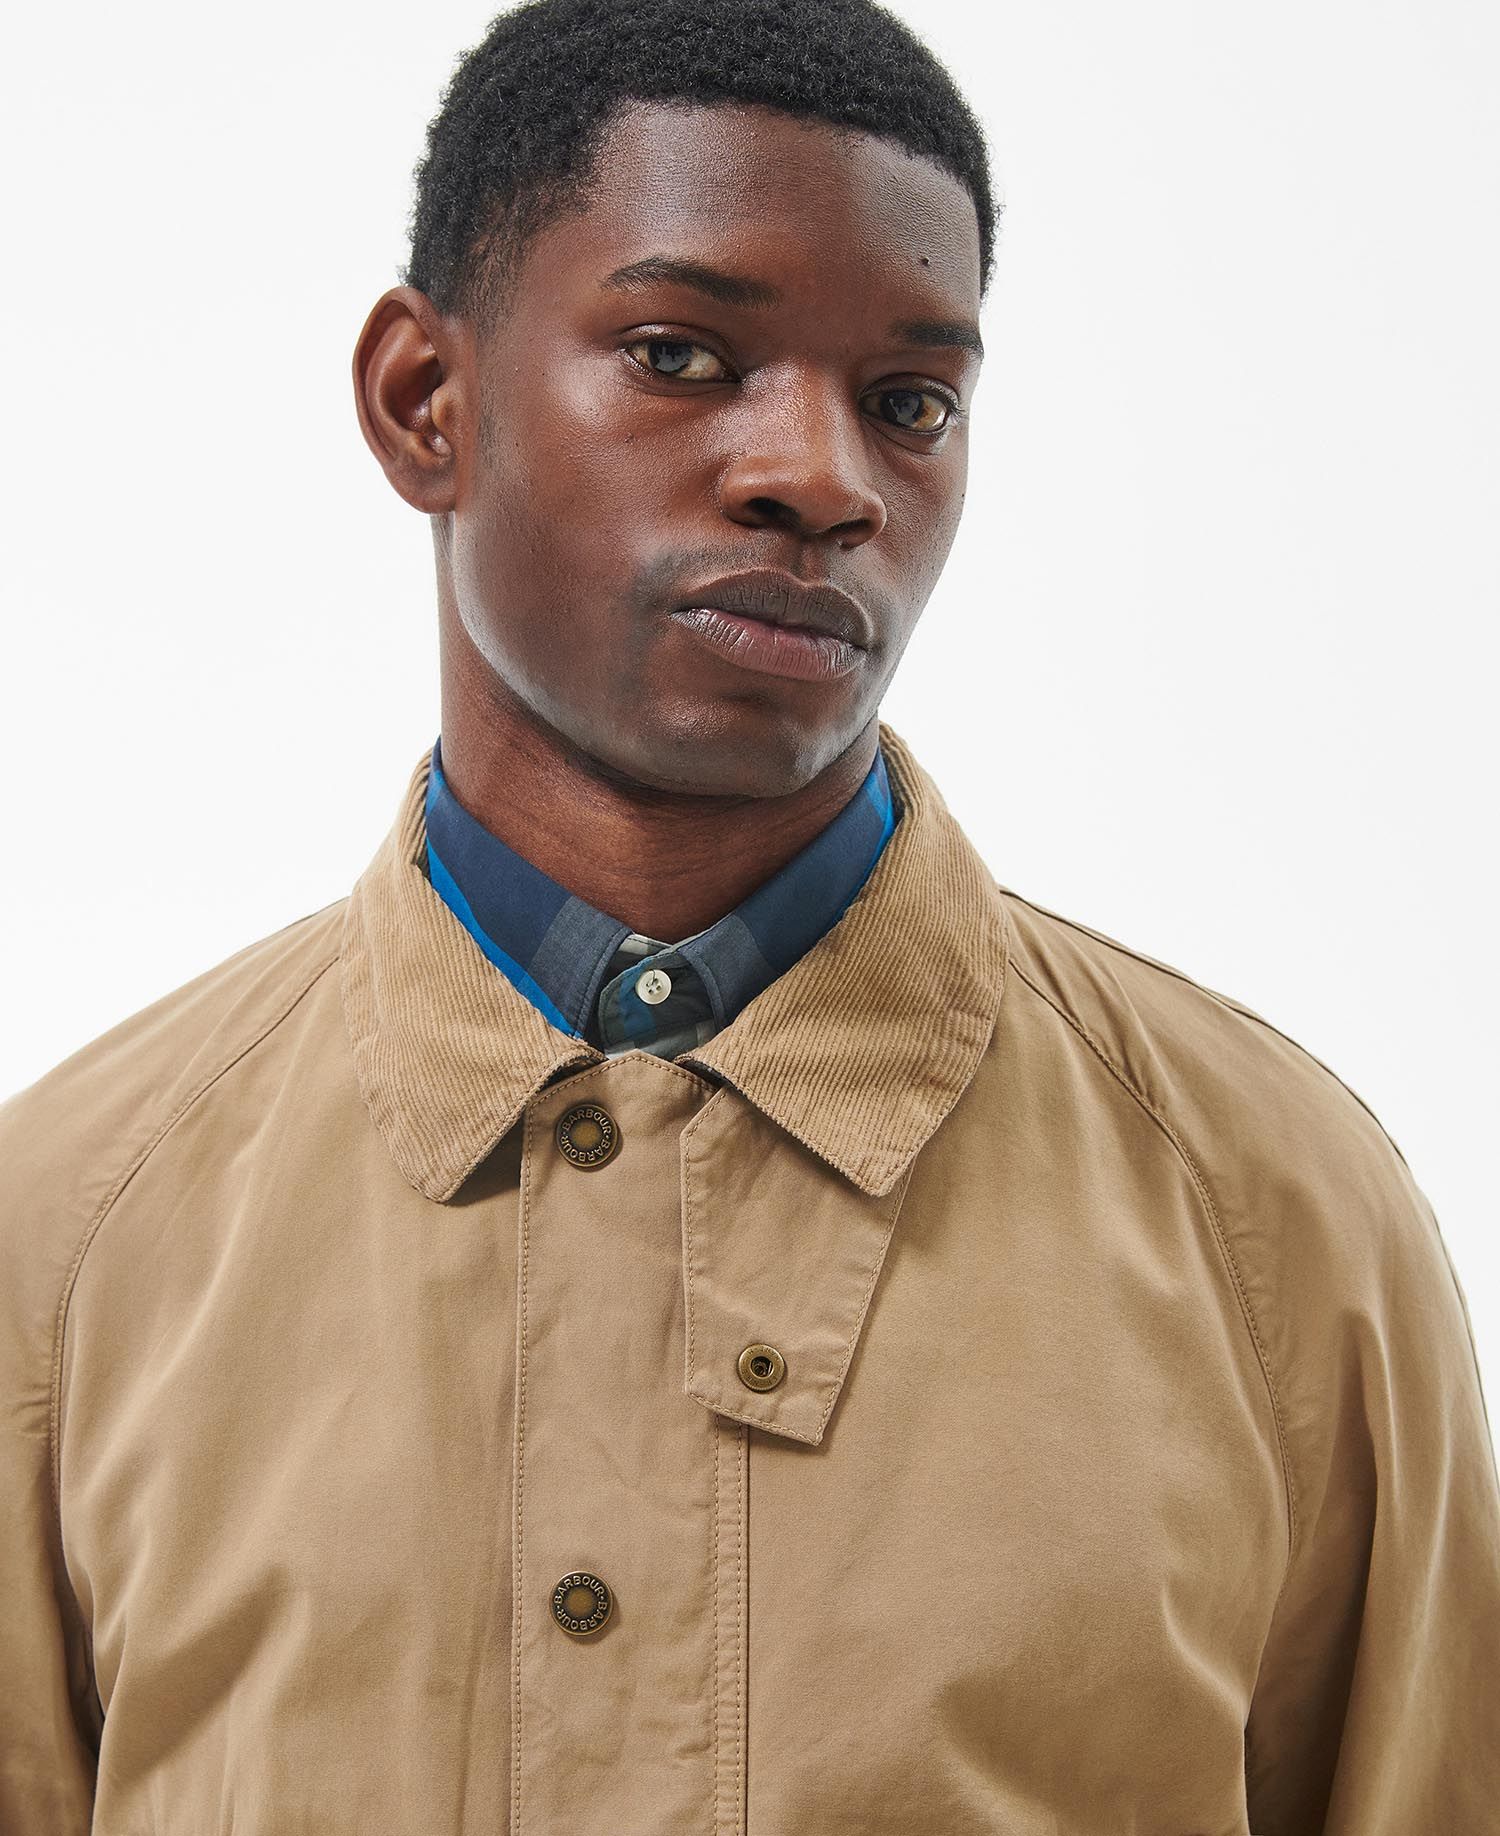 Shop the Barbour Ashby Casual Jacket in Beige | Barbour